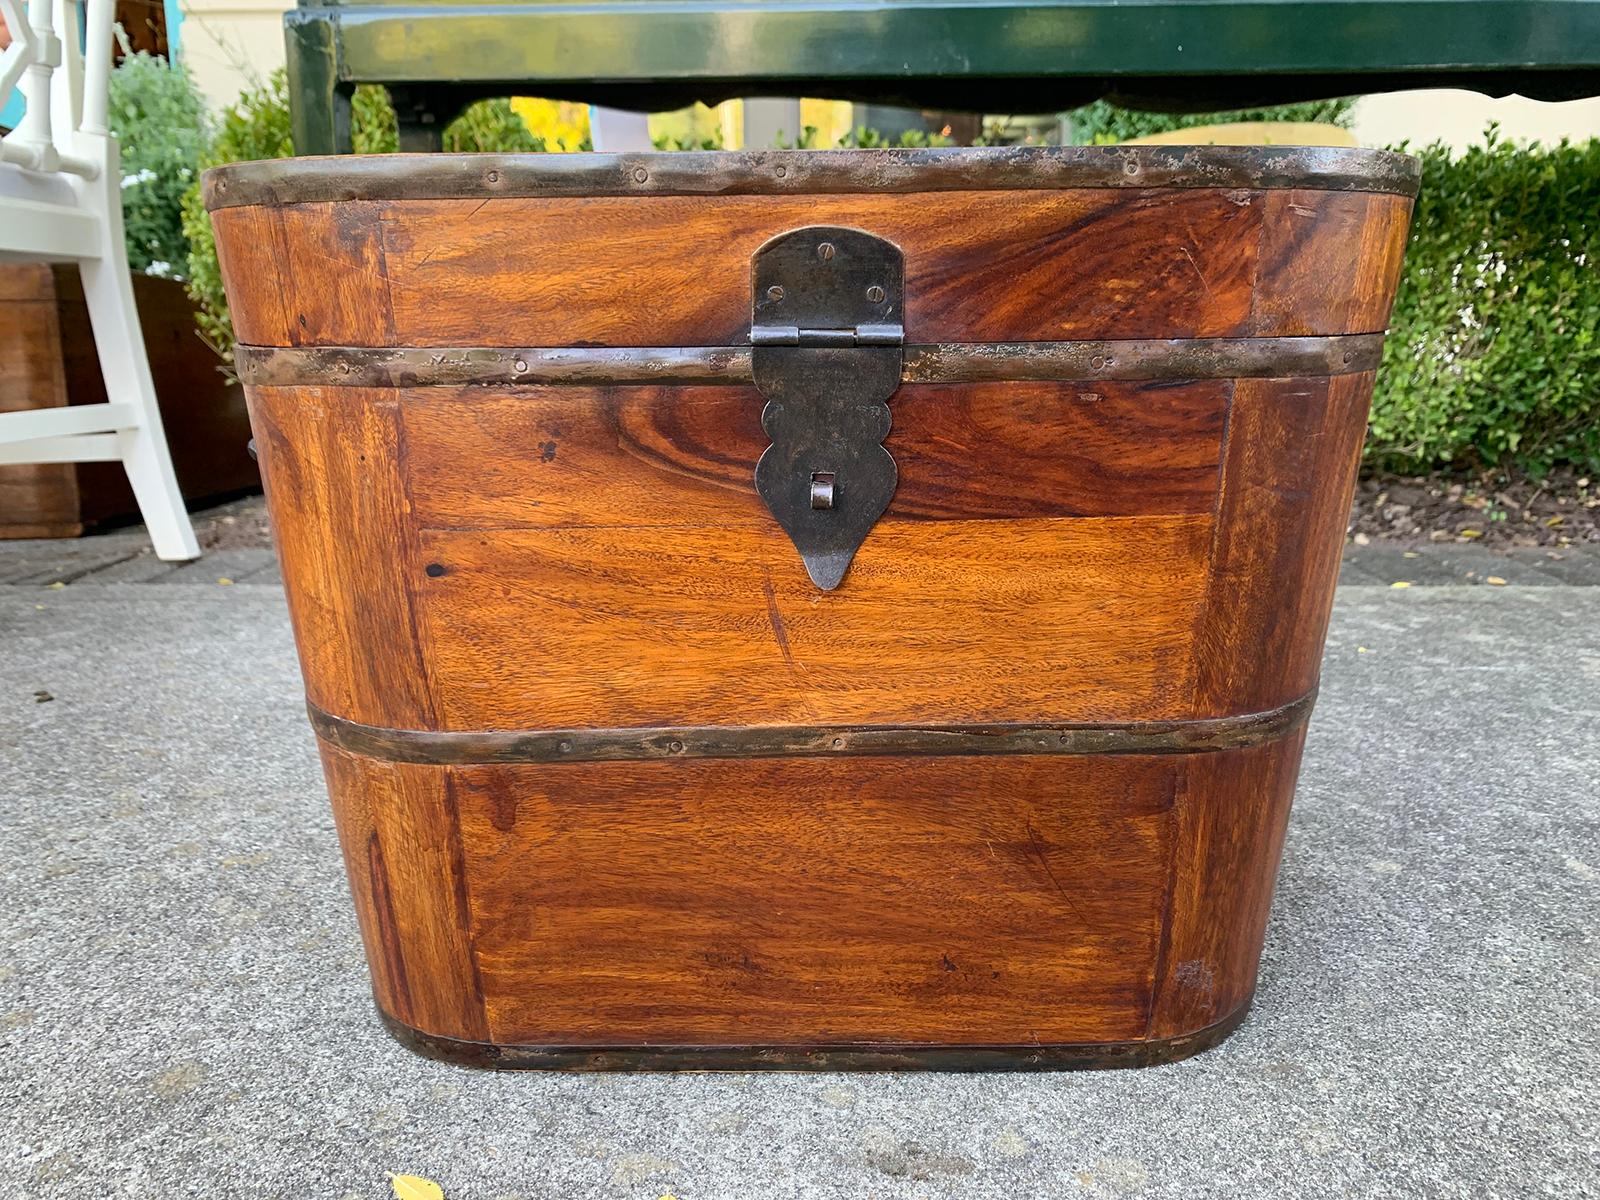 Late 19th-early 20th century camphor wood box, circa 1900.
Campaign style.